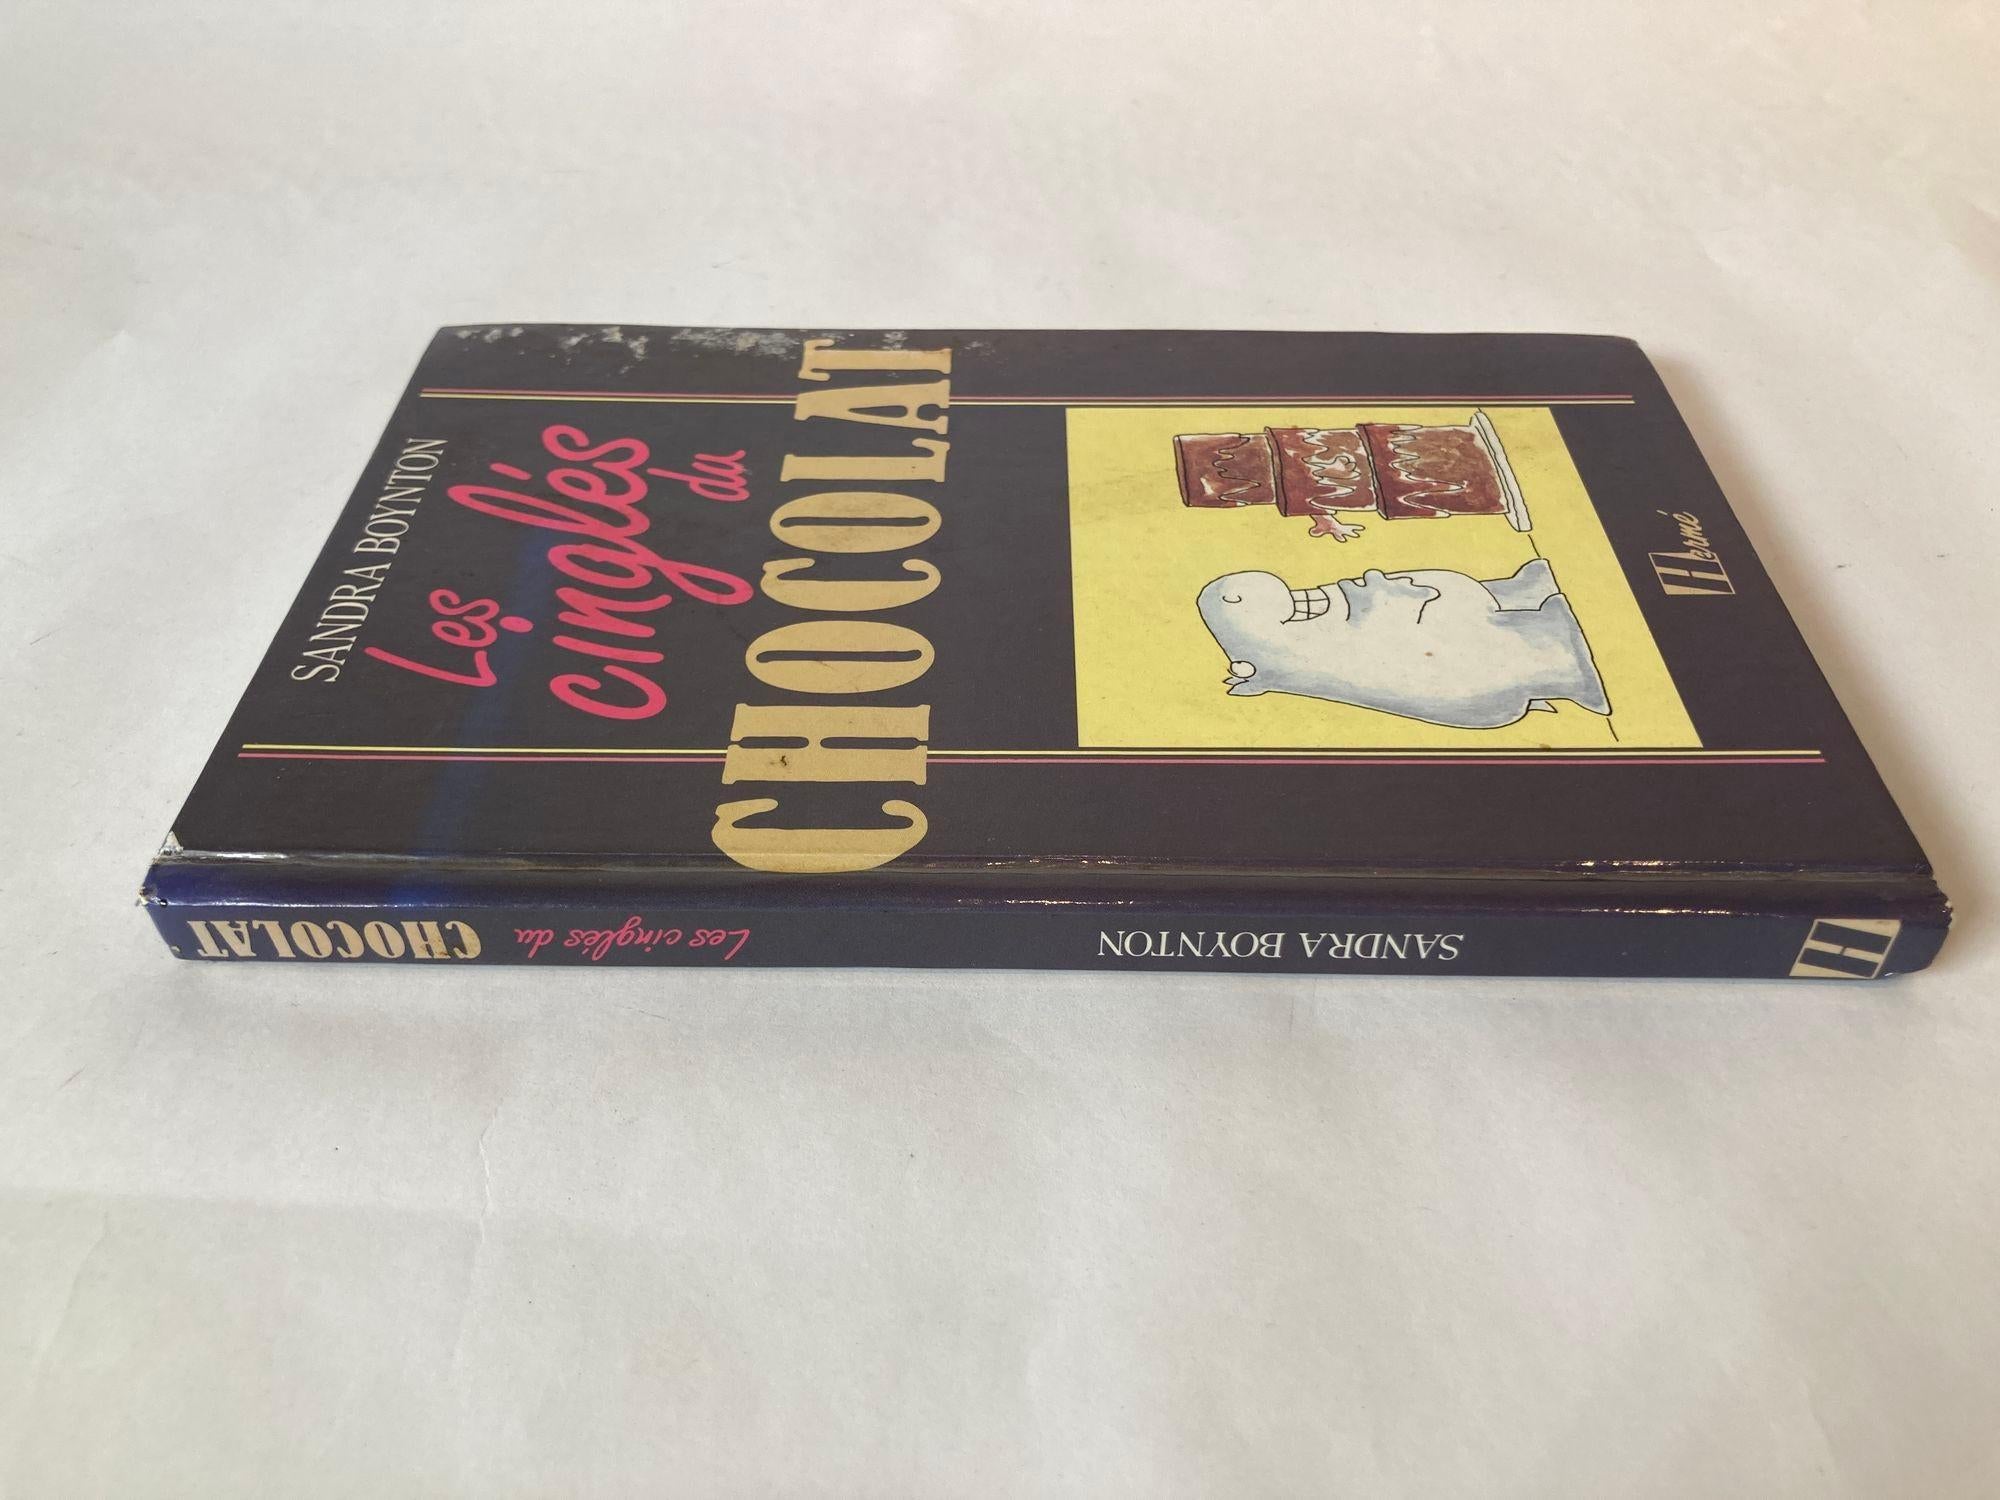 Les cinglés du chocolat Hardcover French Edition.
Text in French small Size.
Dimensions: 8.5 in x 5.5 in x 0.5 in.
Les cinglés du chocolat by Sandra Boynton, Jean-Jacques Brisebarre, Sylvie Girard.
Published: 1987.
English title: Chocolate: The